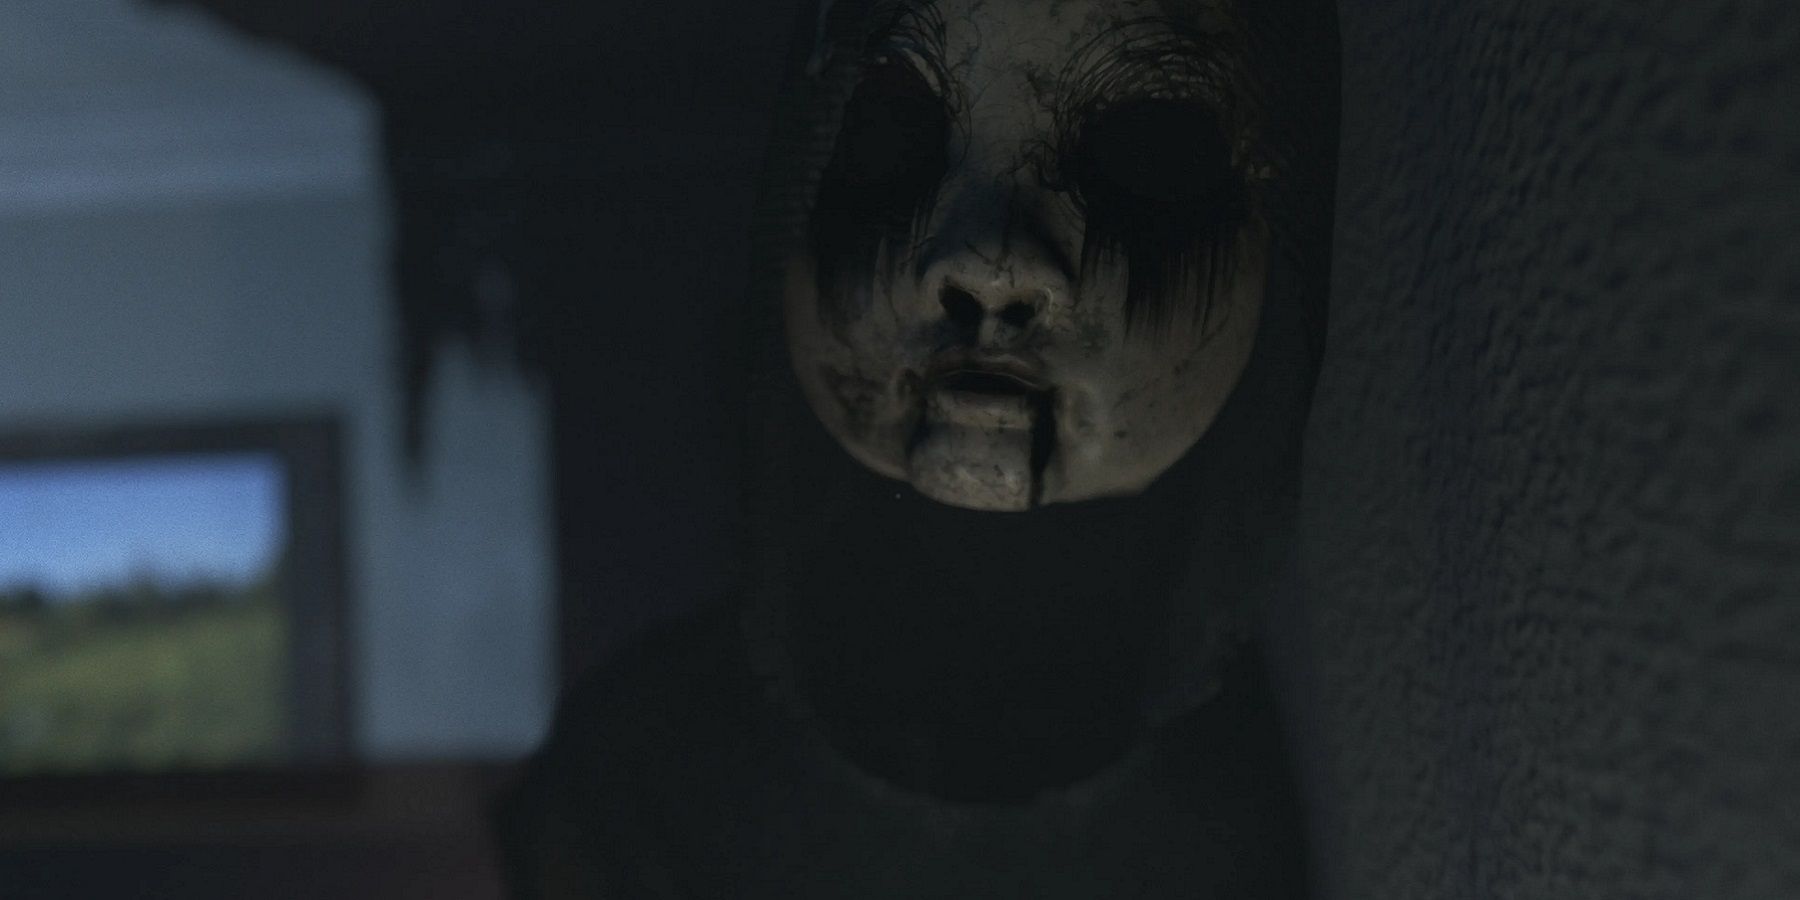 Screenshot from Visage showing a close-up of a ghostly face.